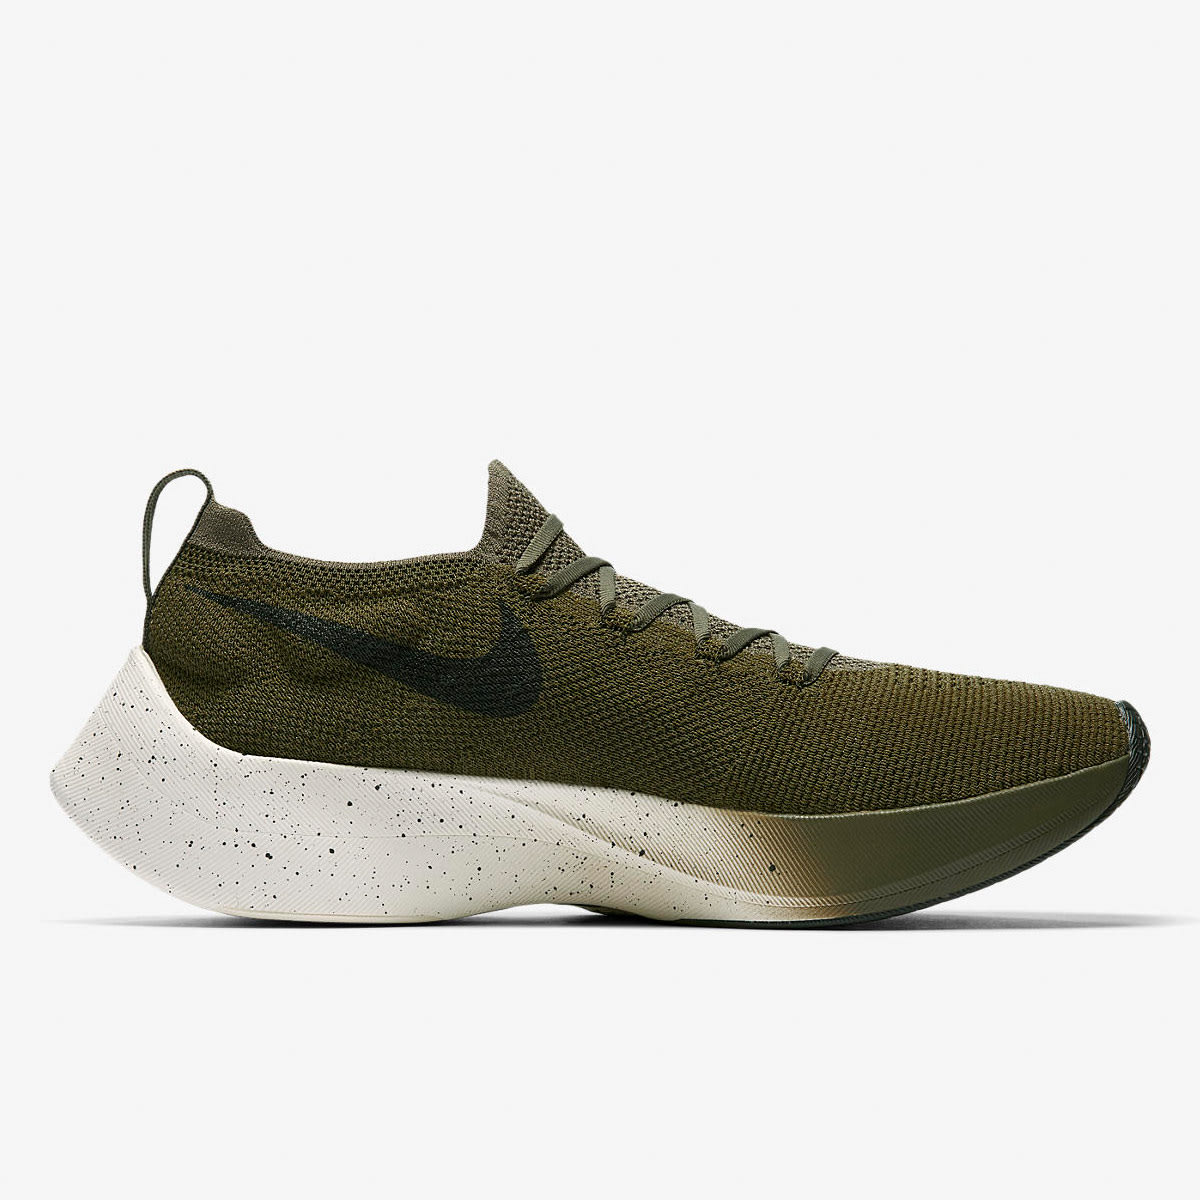 Nike Vapor Street Flyknit (Medium Olive, Sequoia & Sail) | END. Launches